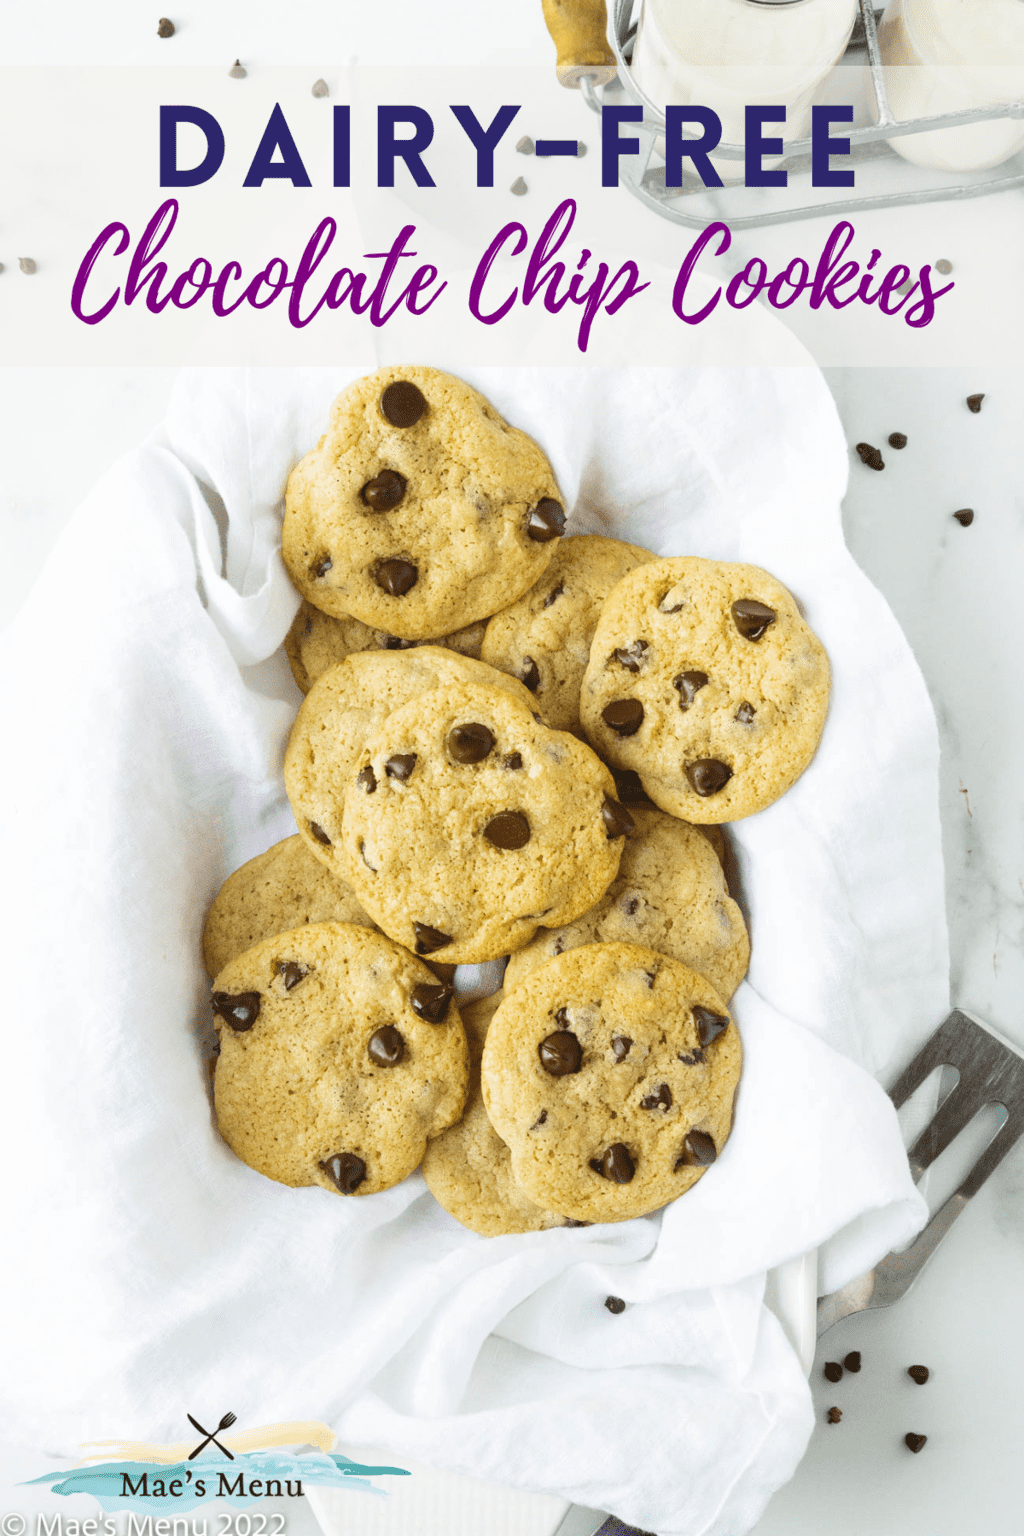 A Pinterest pin for dairy-free chocolate chip cookies with an overhead shot of a basket of the cookies.